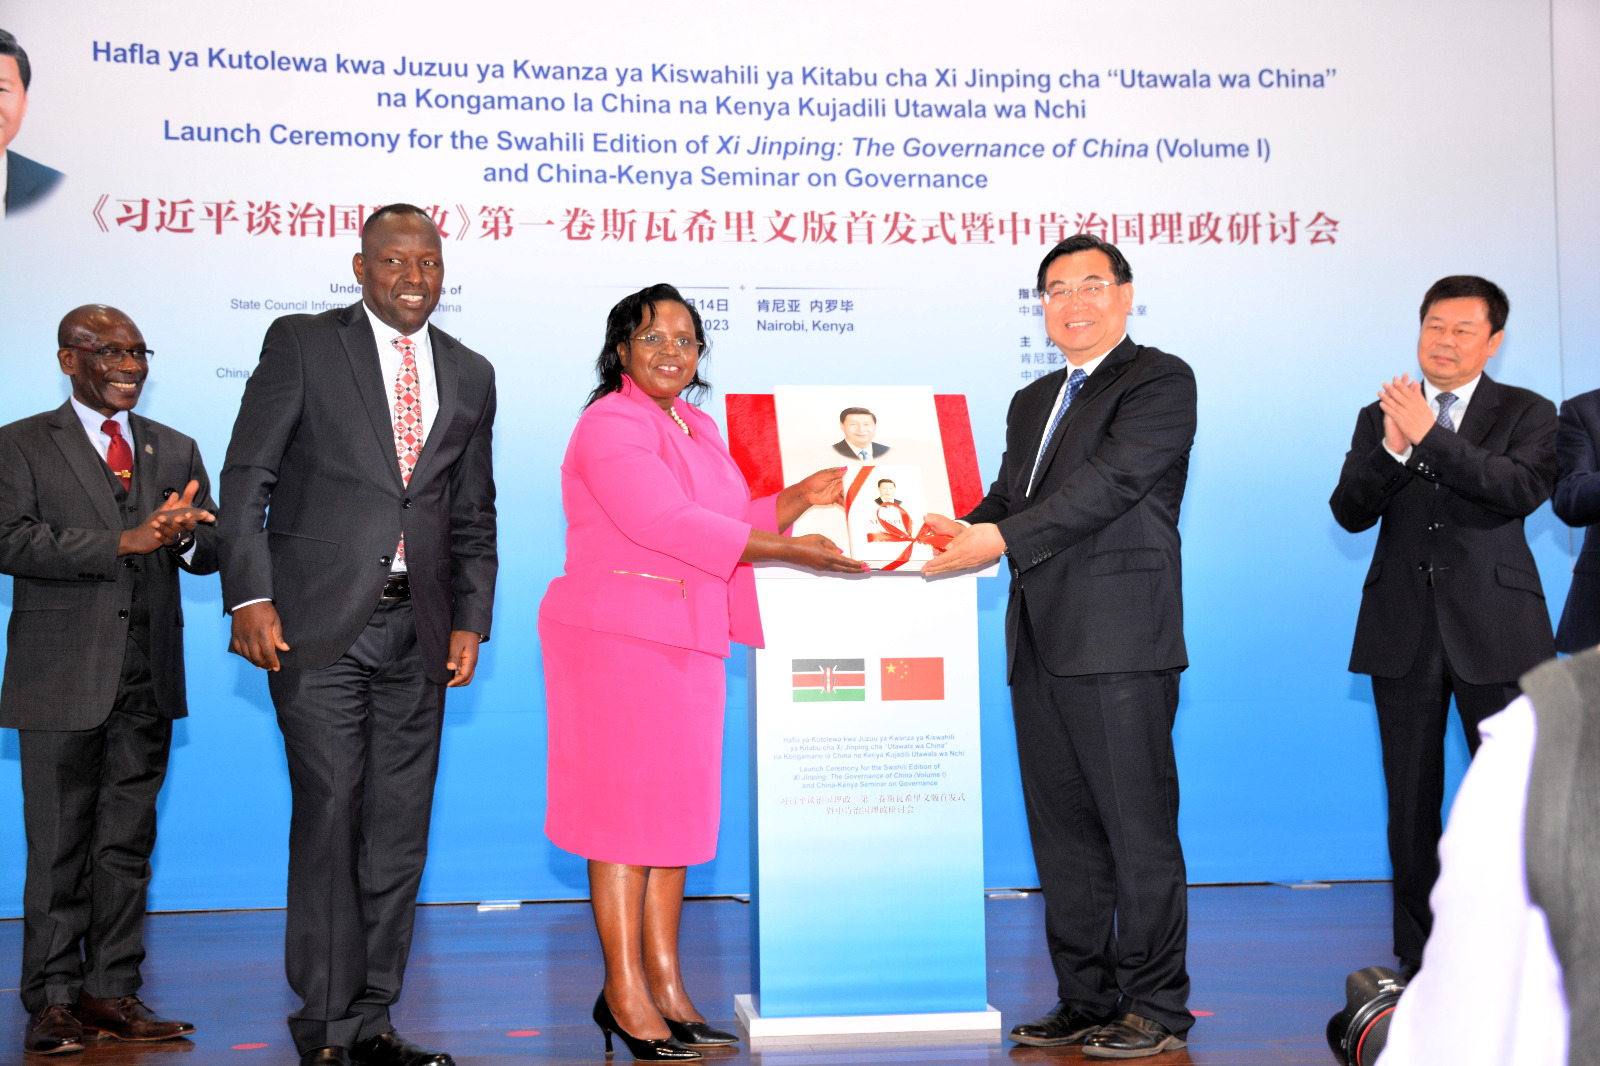 CS Malonza posing with Mr. Hu Heping, China's Minister for Tourism, Culture and Media, after the unveiling of the Swahili version of the "Governance of China."